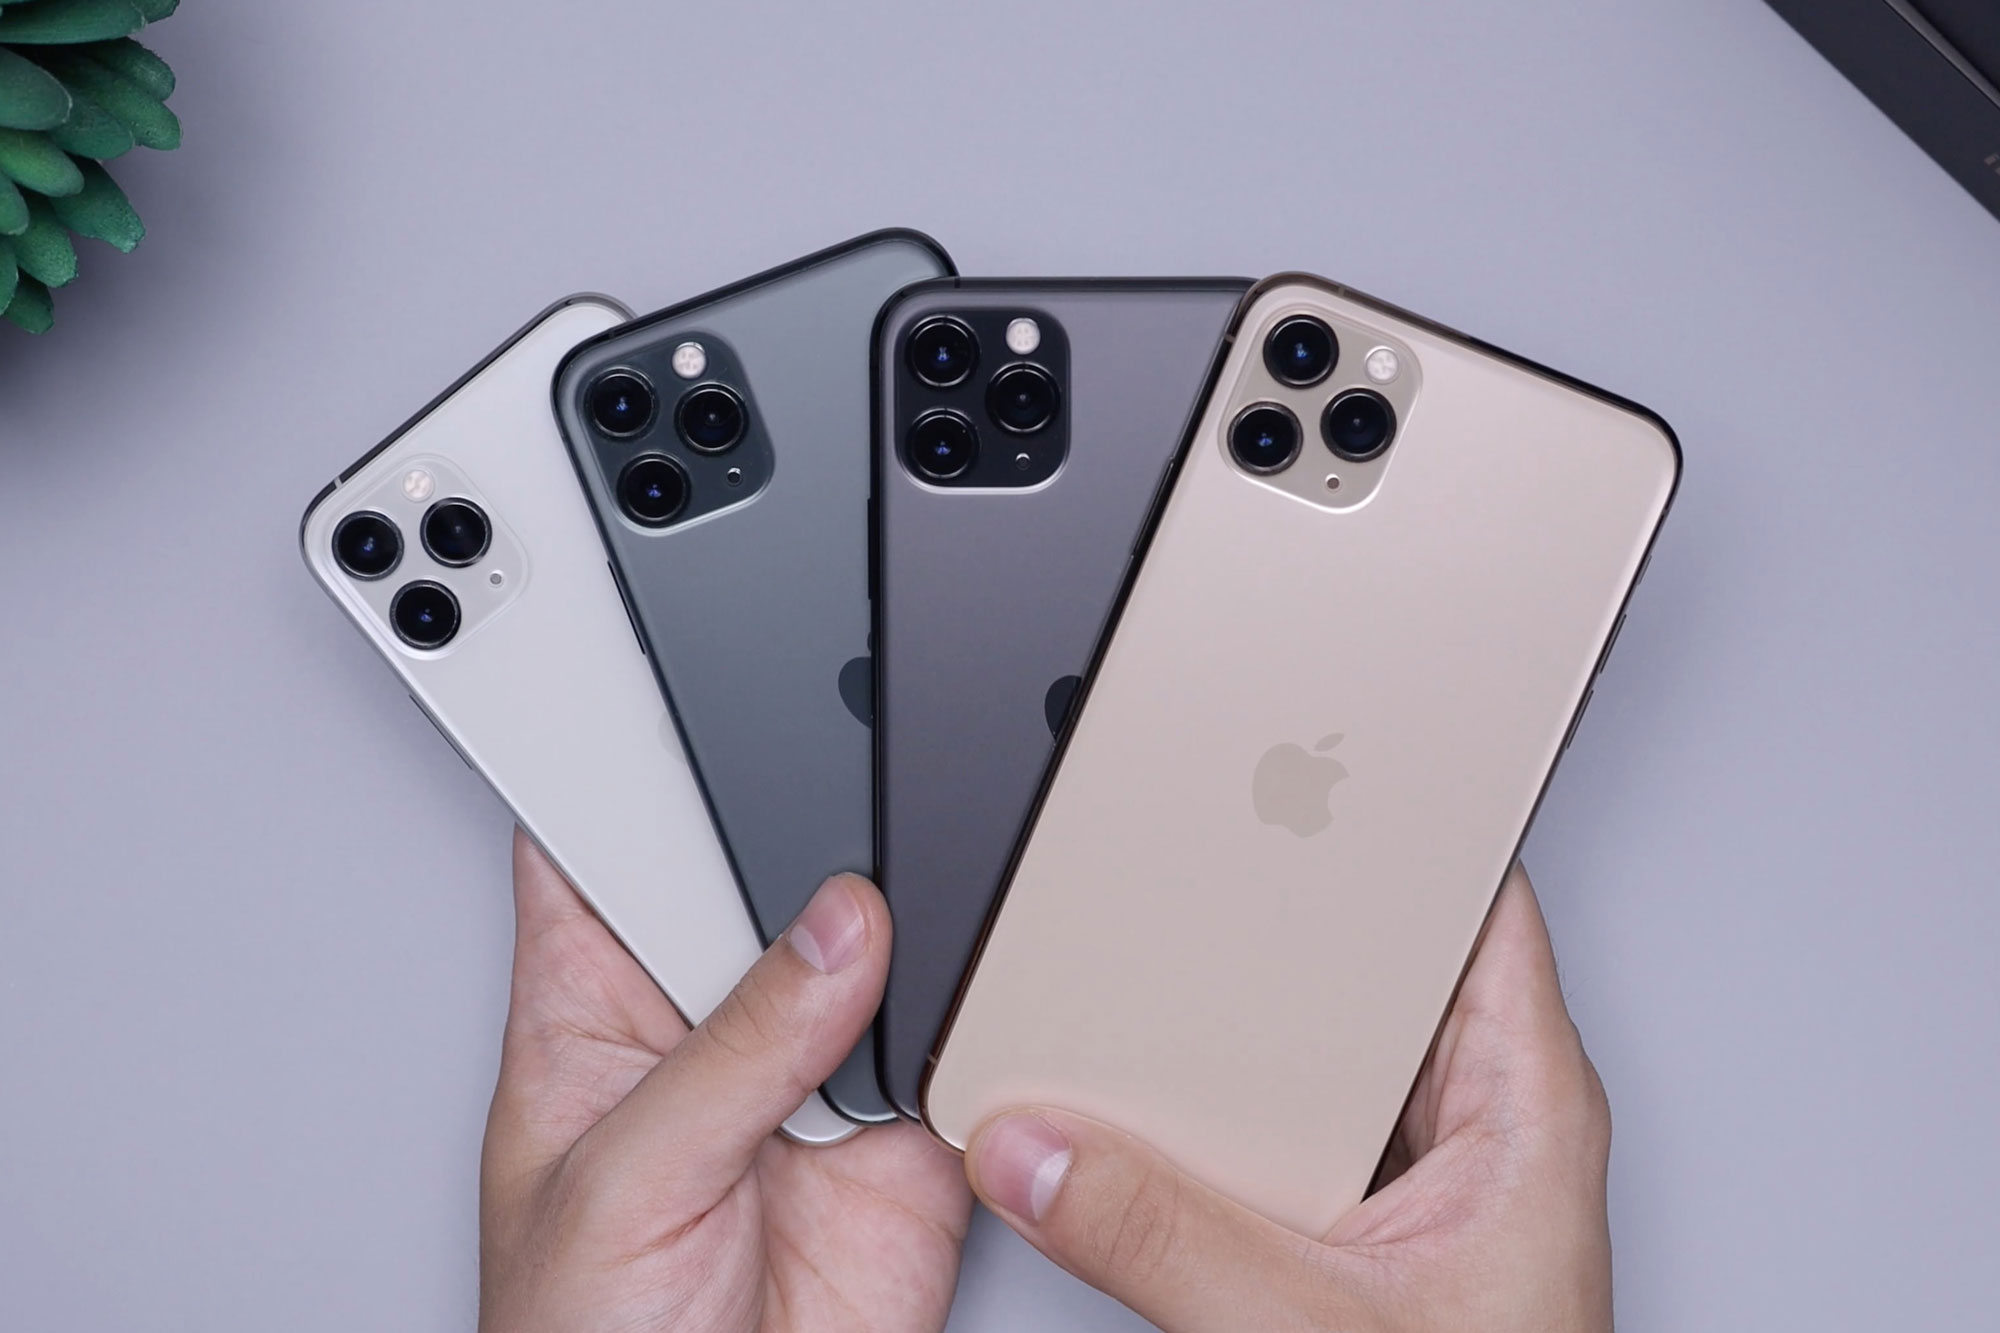 iPhone Size Comparison Chart 2023 – From The Smallest To The Biggest iPhones